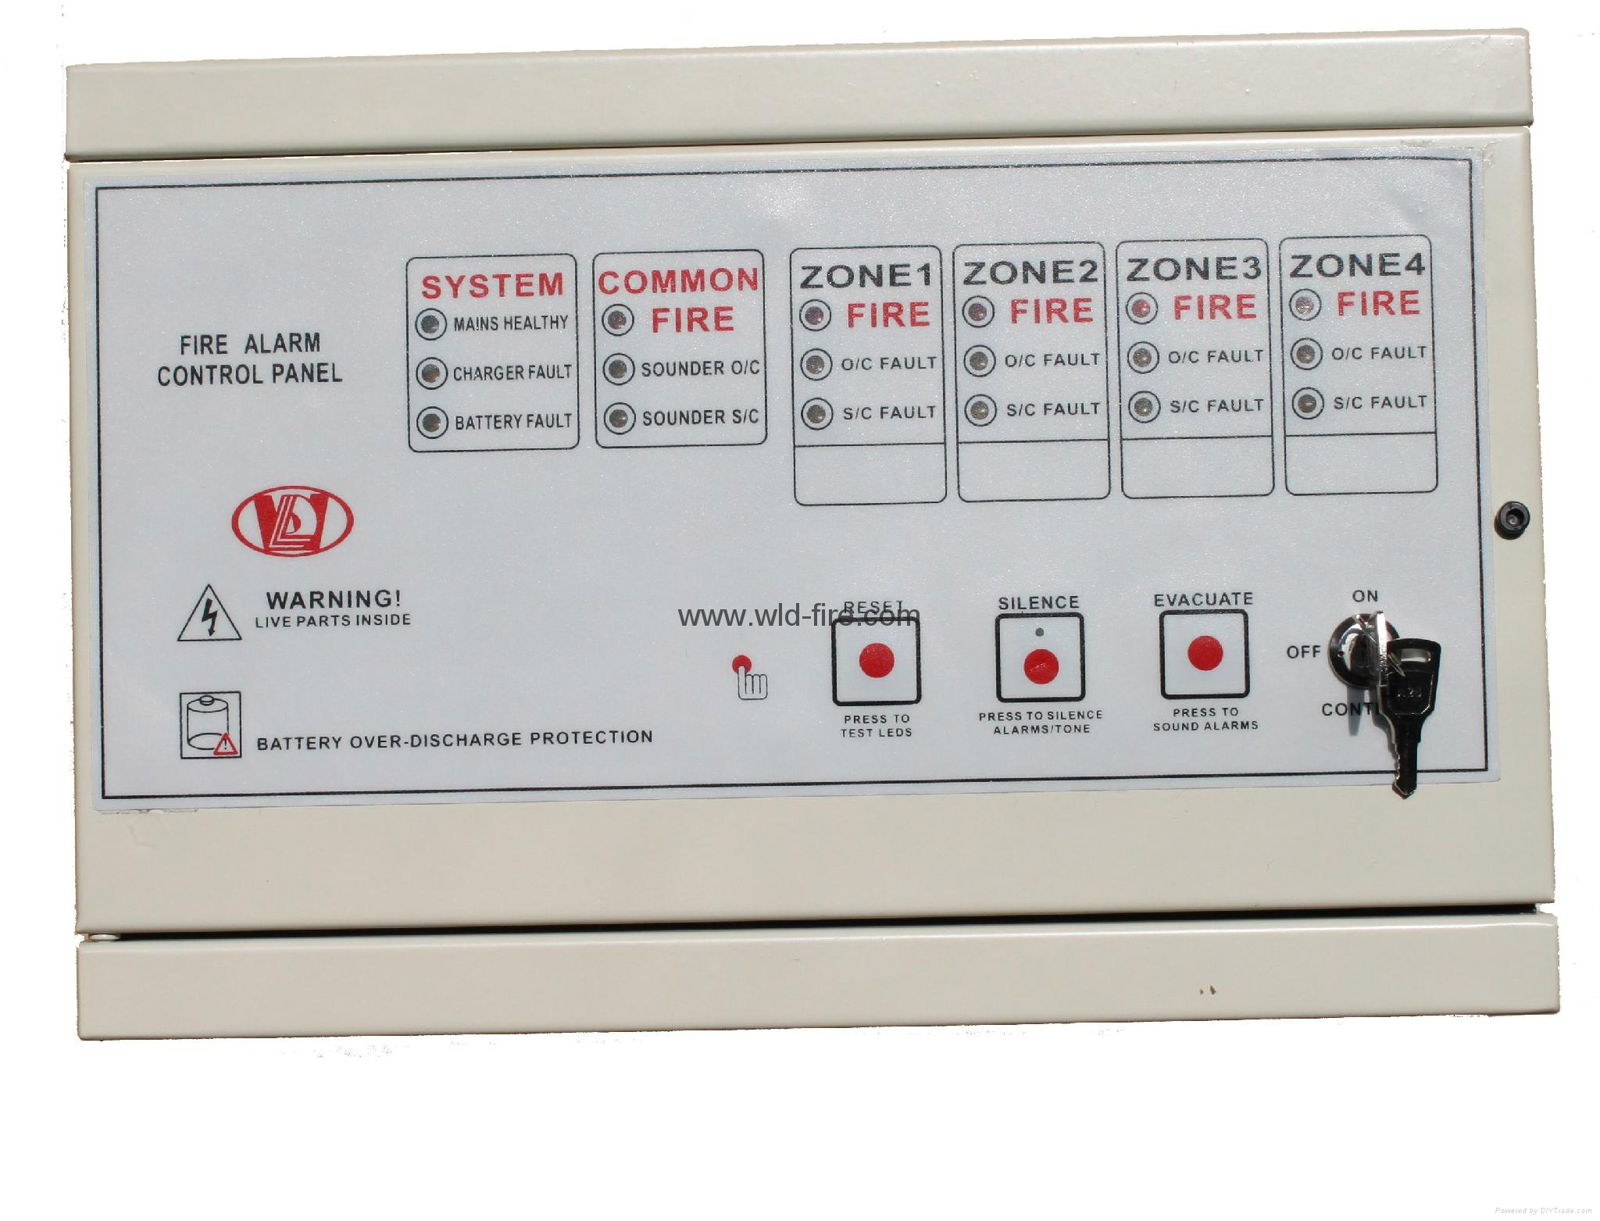 CONVENTIONAL FIRE ALARM PANEL